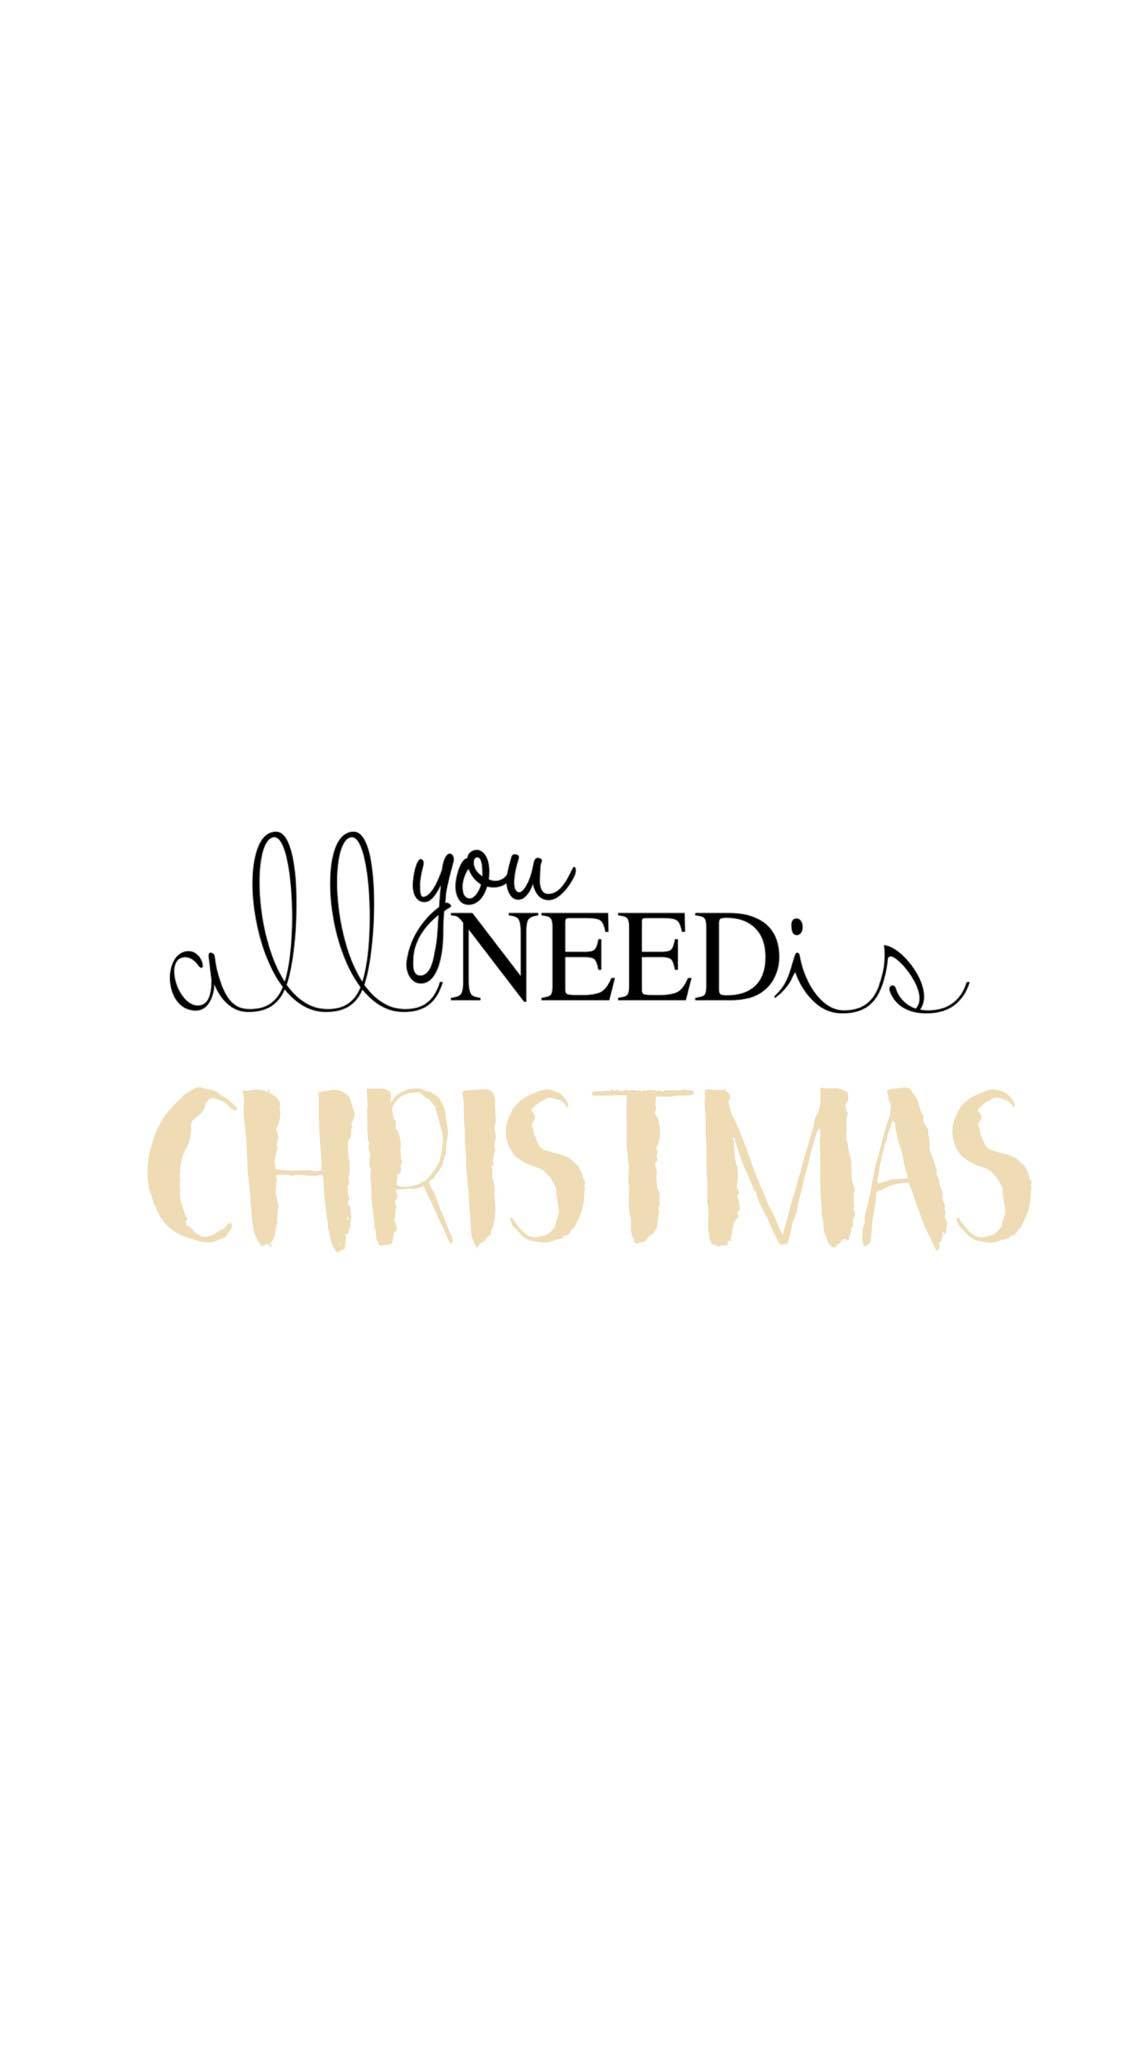 Quotes Christmas Wallpaper Free Quotes Christmas Background